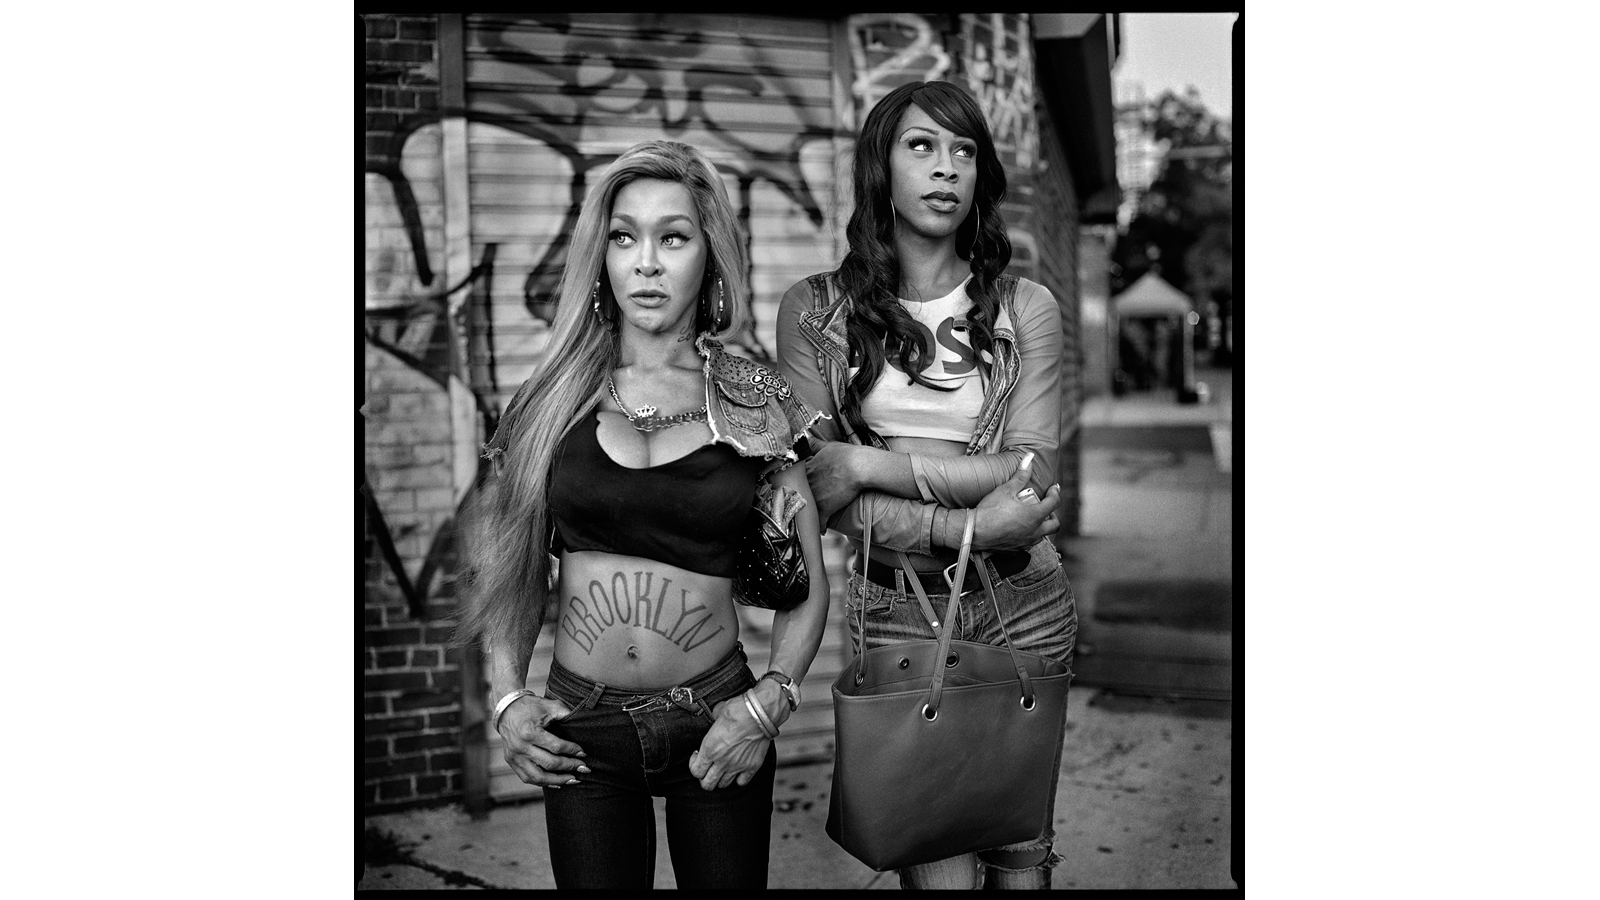 Striking photos of transgender life in New York's most famous LGBT nei...